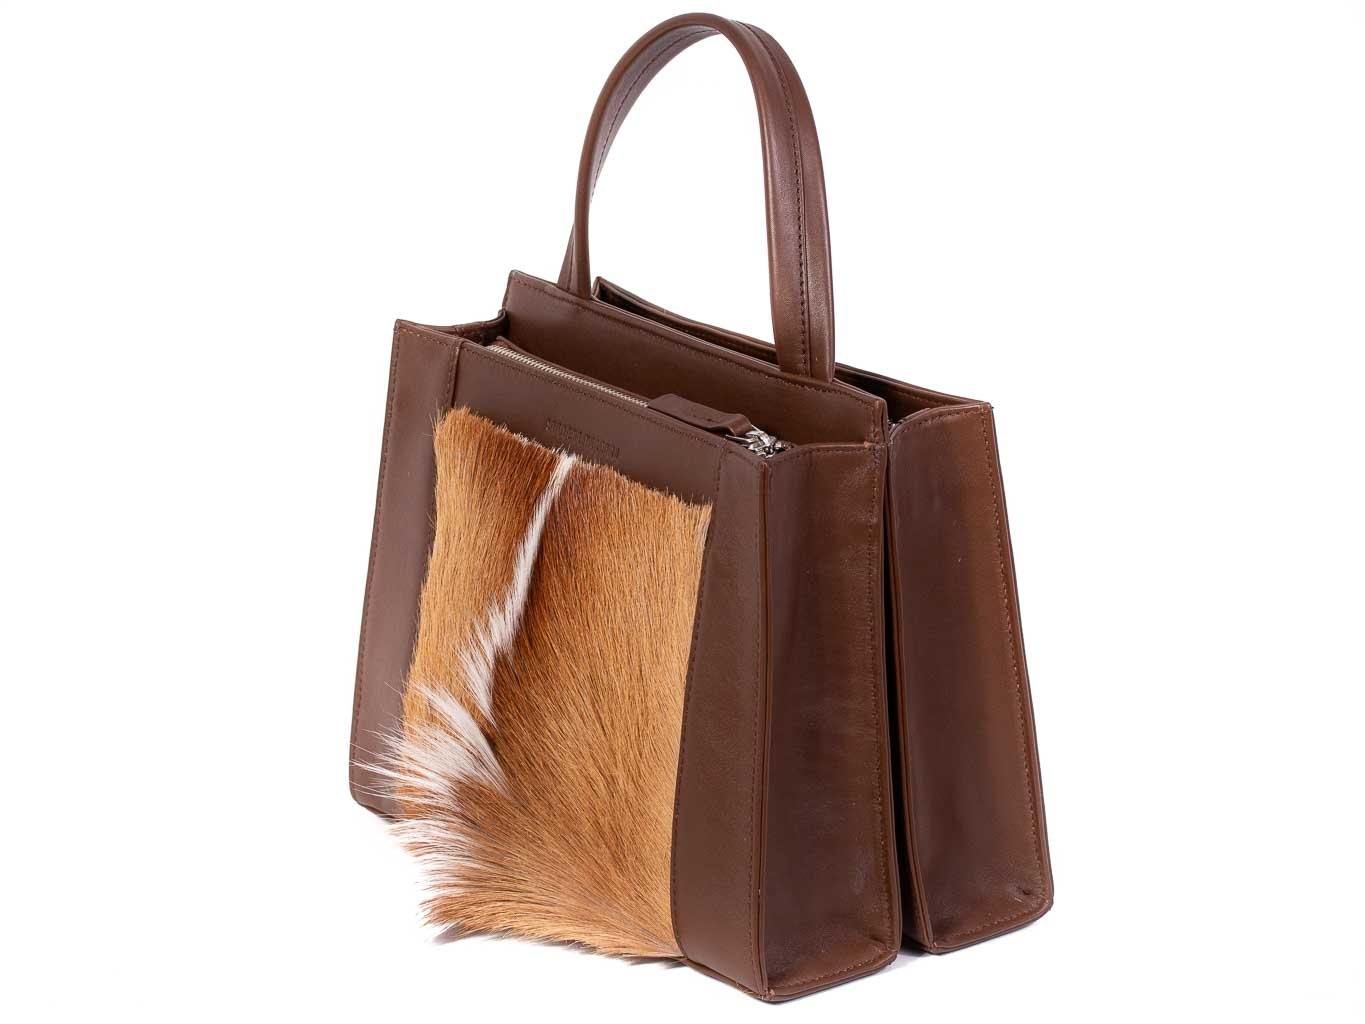 Top Handle Springbok Handbag in Cocoa Brown with a fan feature by Sherene Melinda front